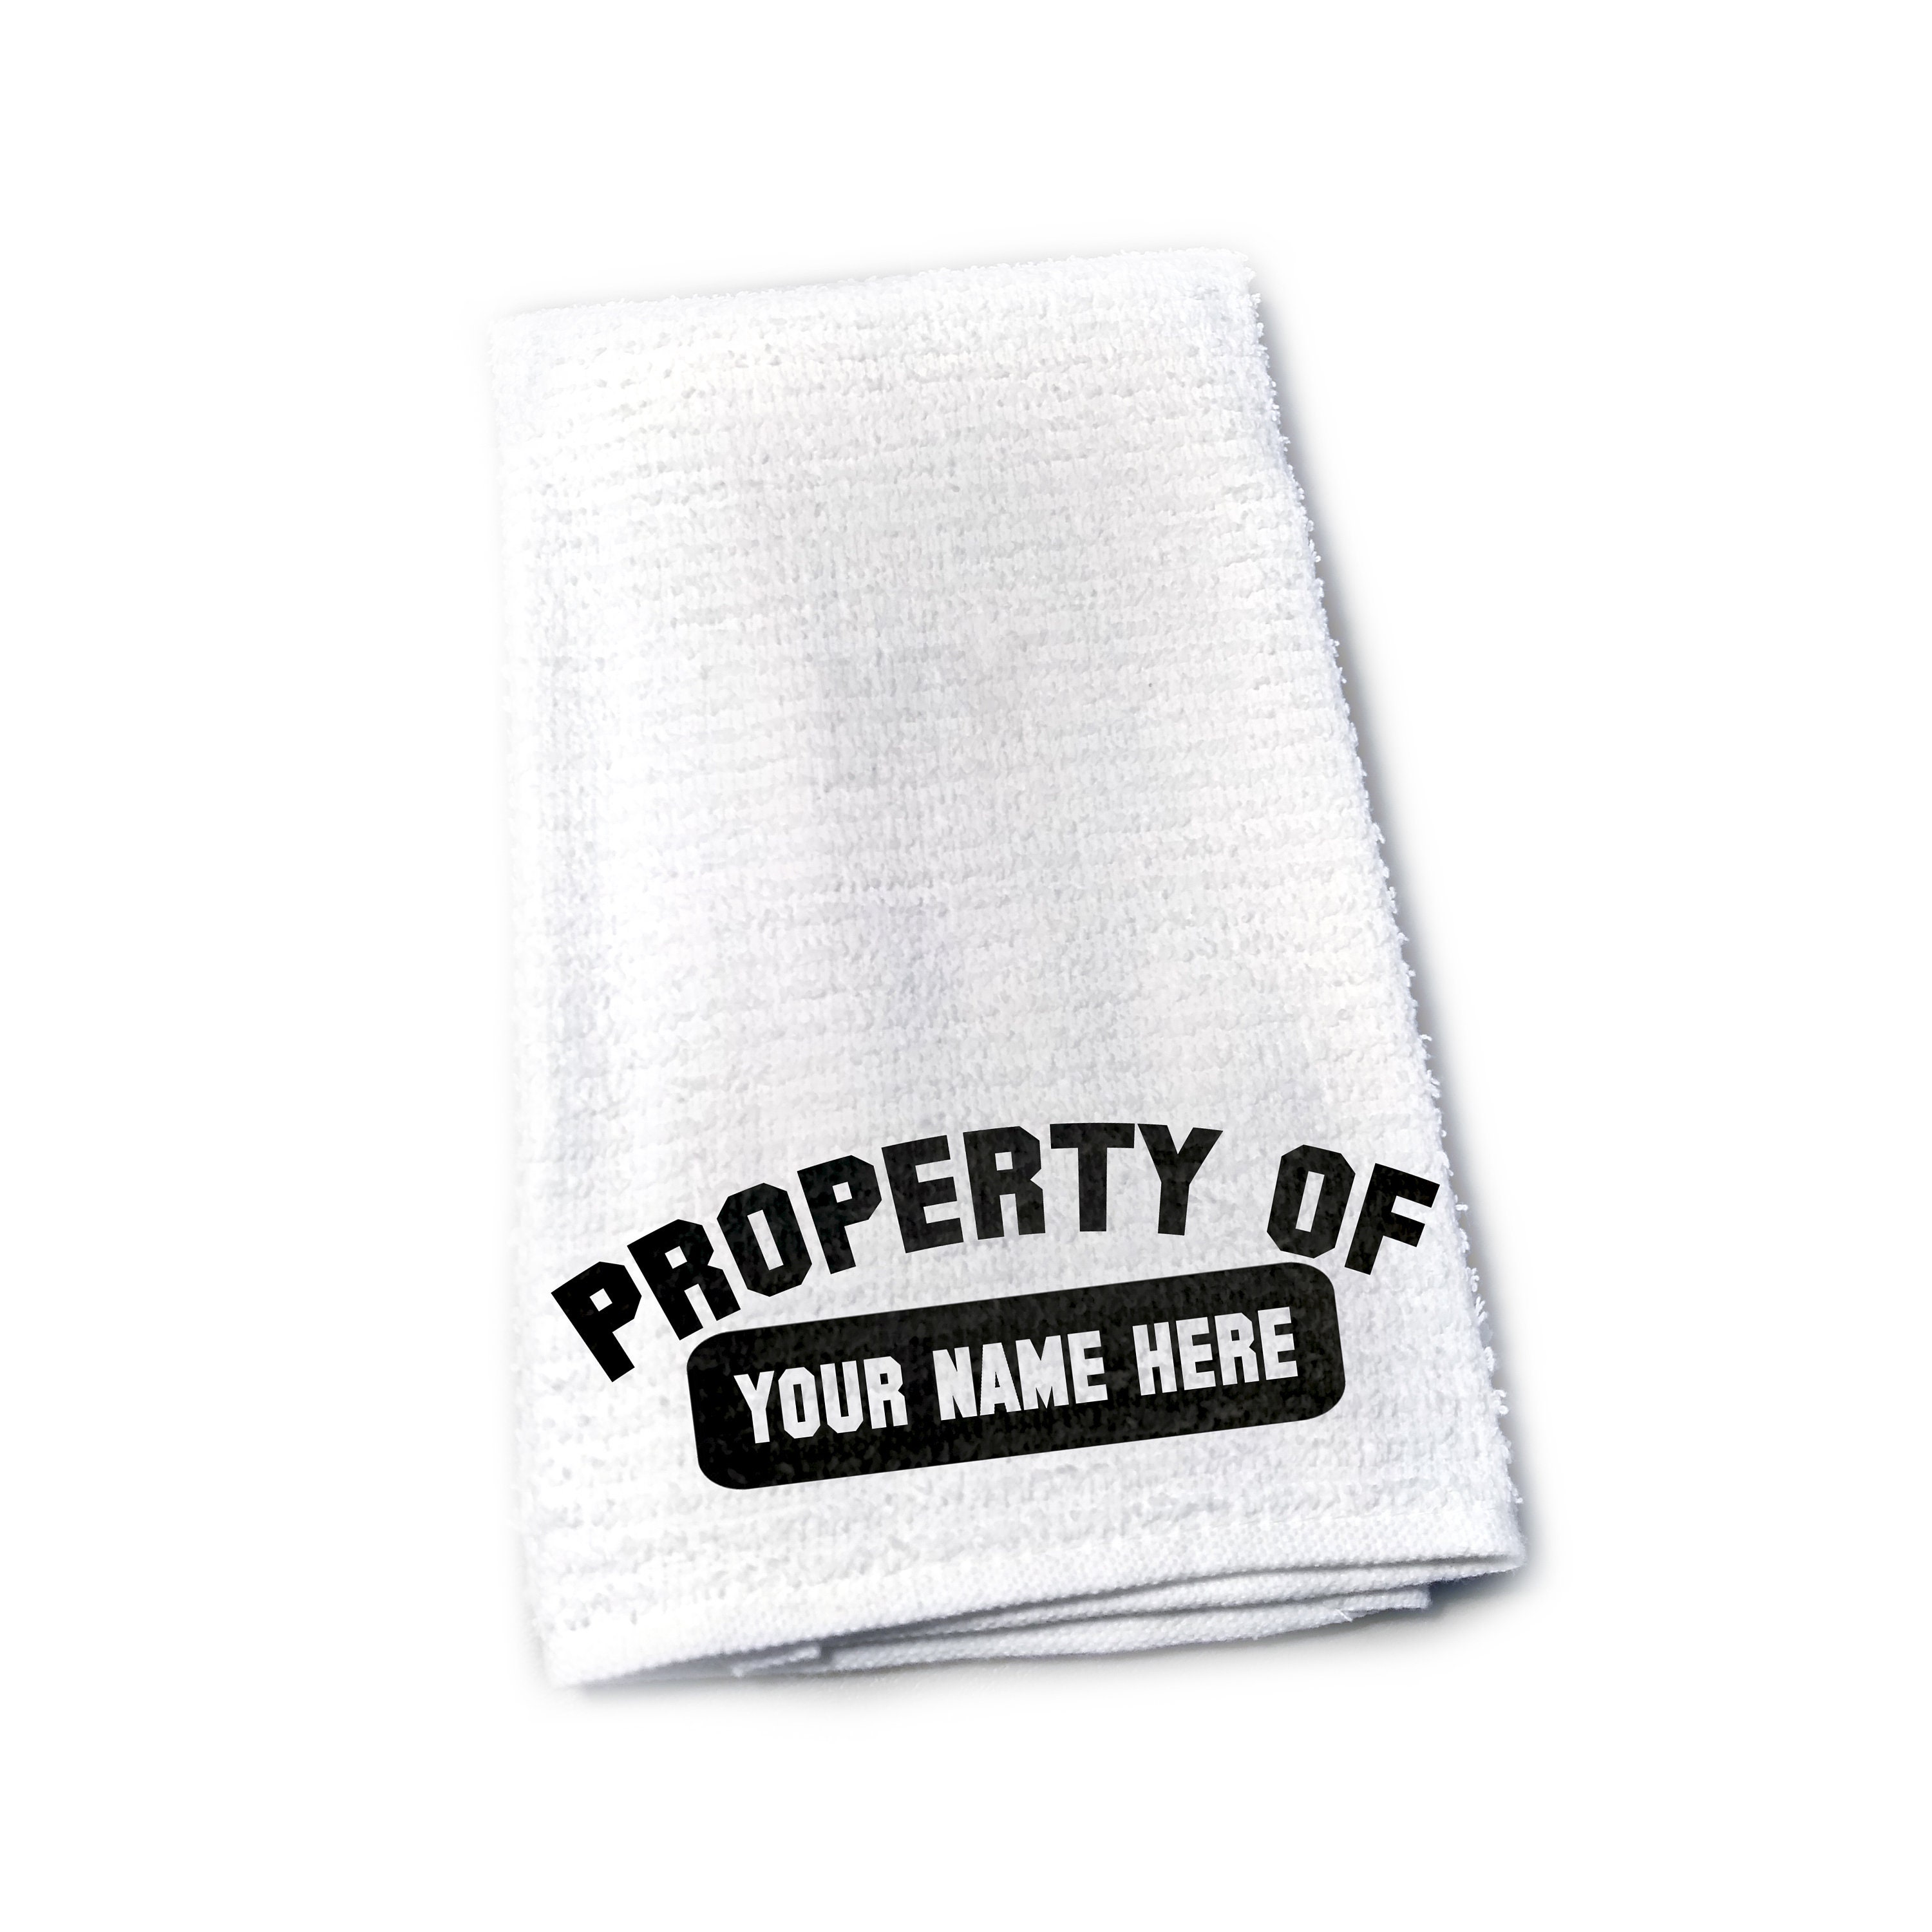 Personalized Property of After Sex Towel Cum Rag Funny image photo